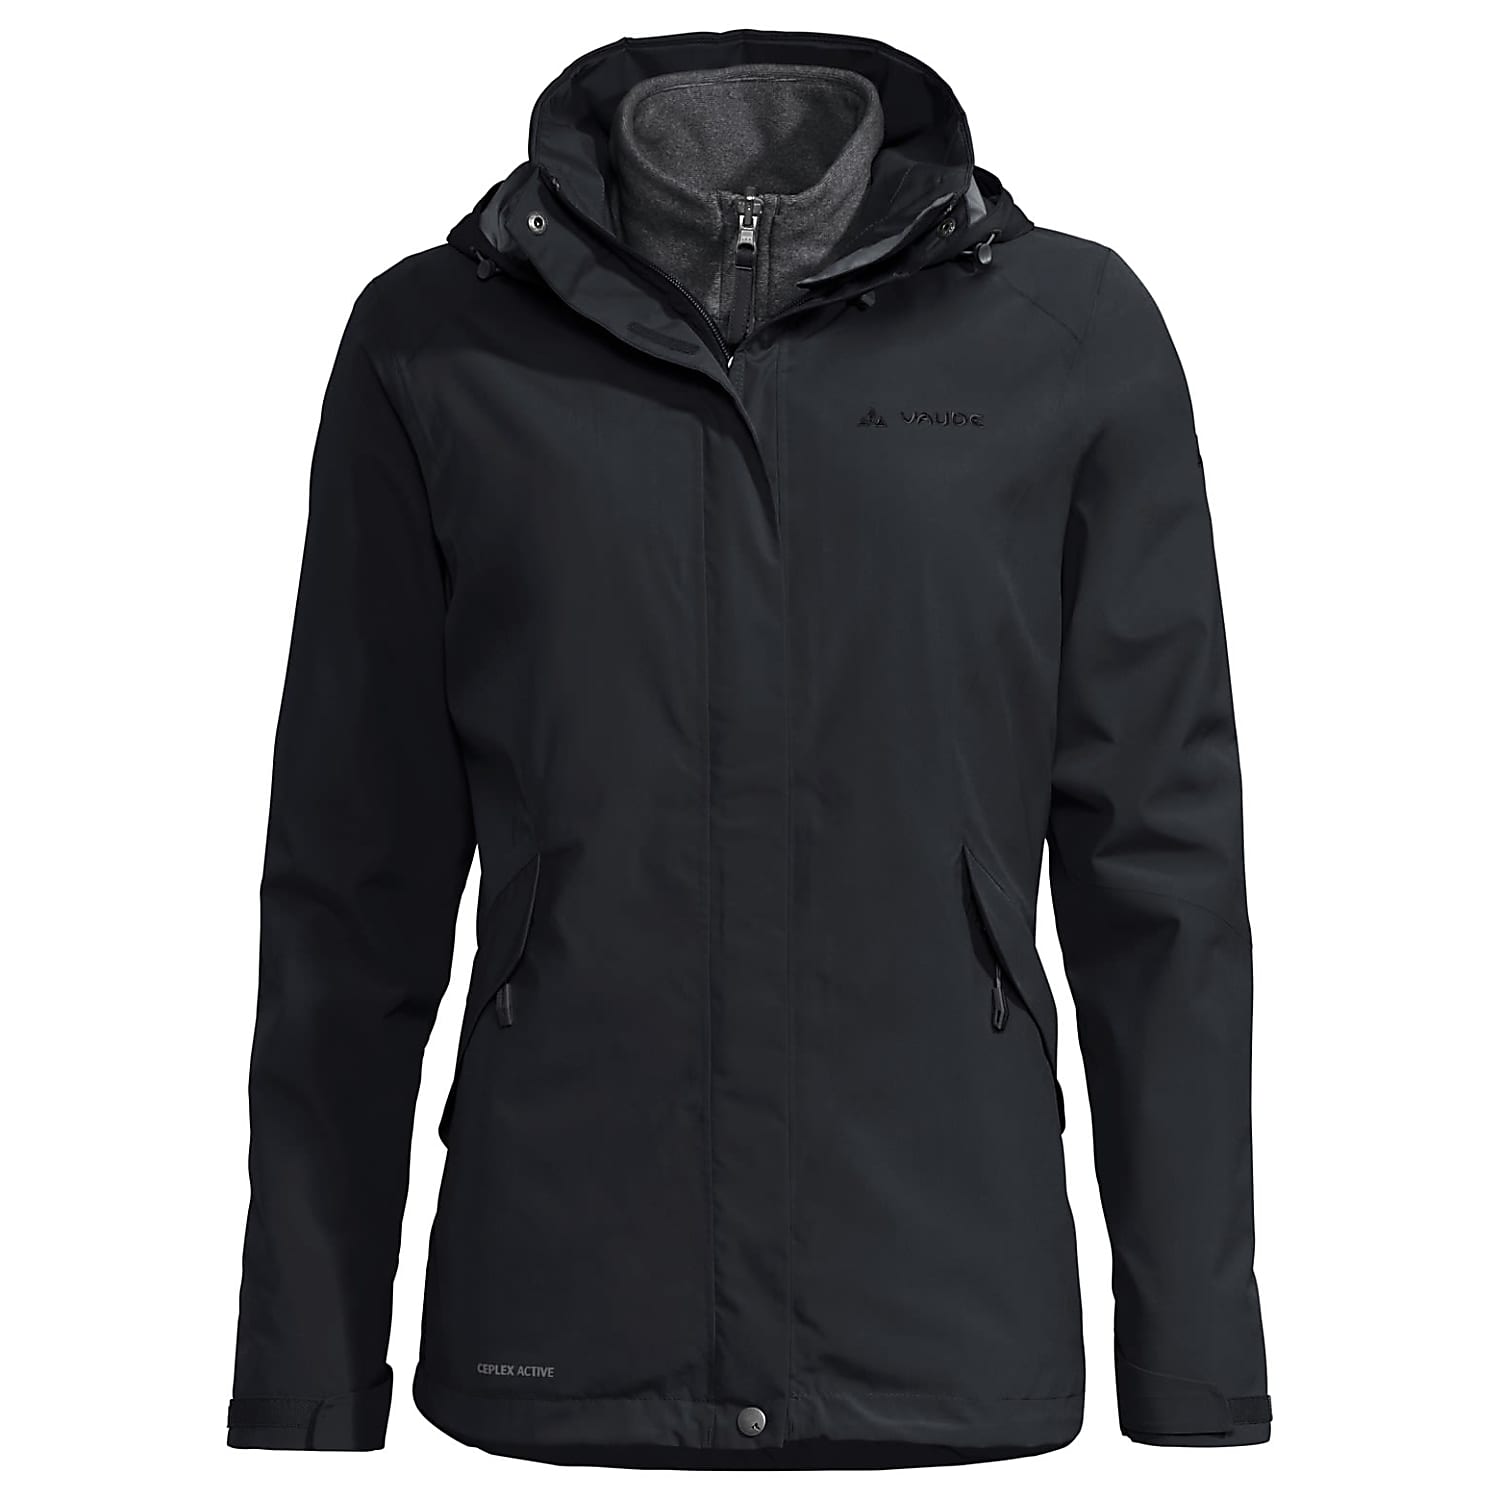 Vaude WOMENS ROSEMOOR 3IN1 JACKET, Black - Fast and cheap shipping